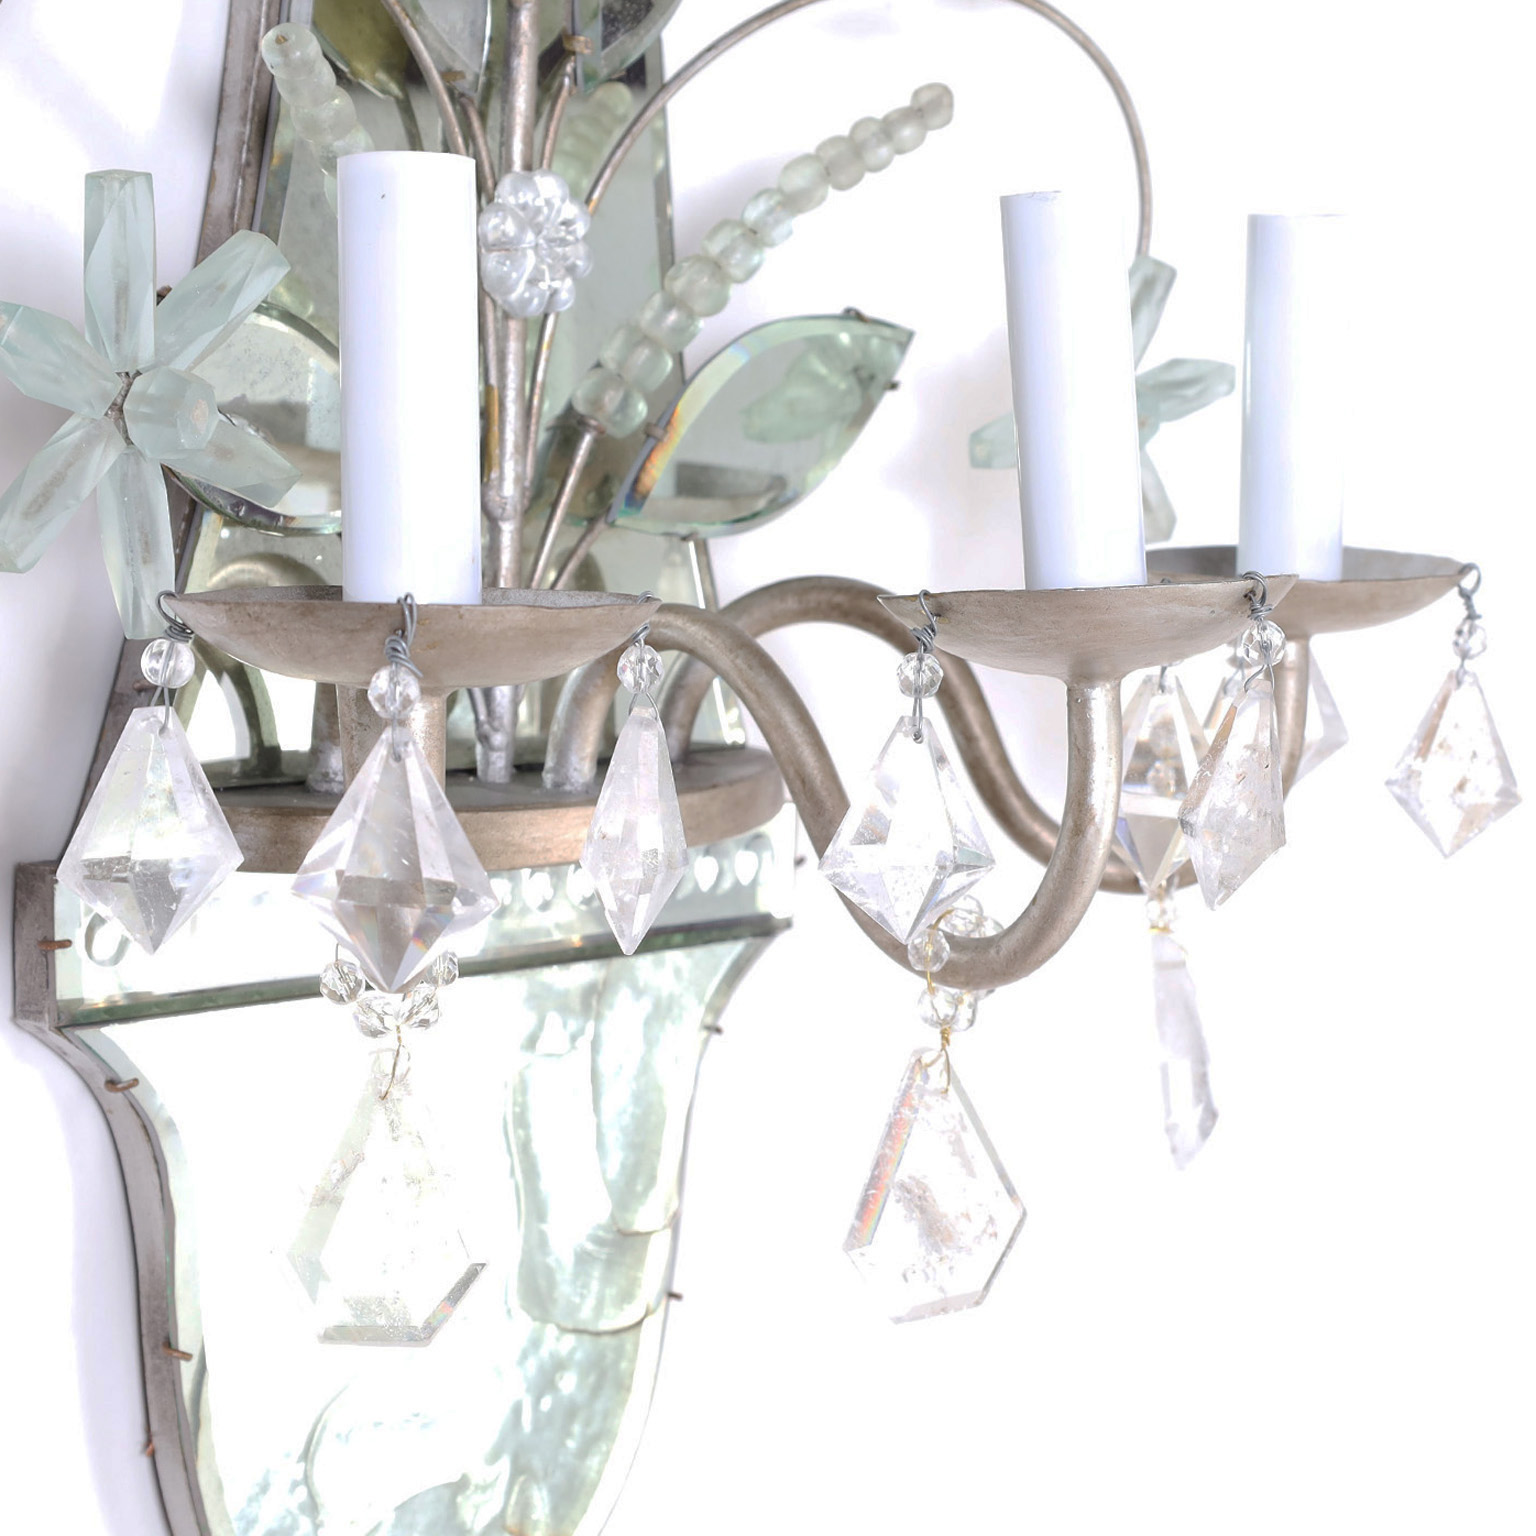 Pair of Mid-Century Italian Mirrored Wall Sconces with Rock Crystals